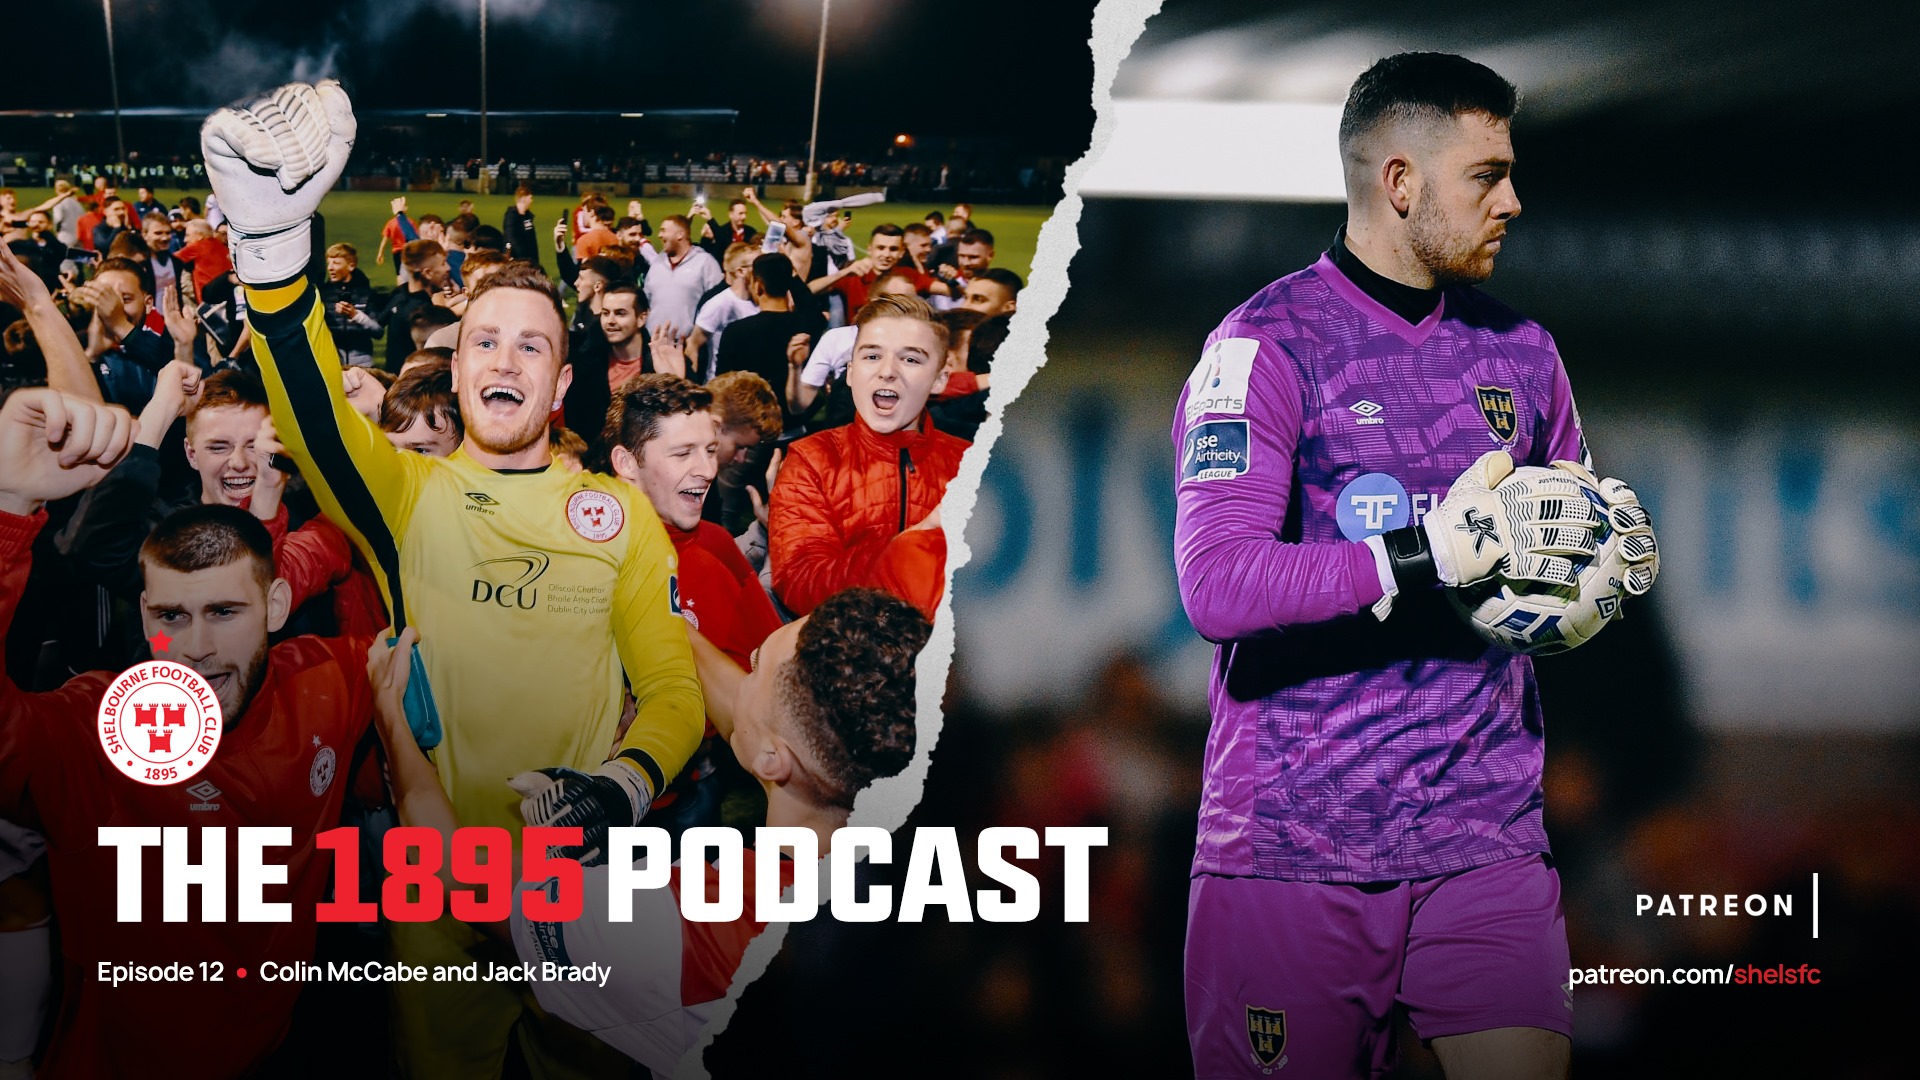 The 1895 Podcast | The Colin McCabe and Jack Brady episode